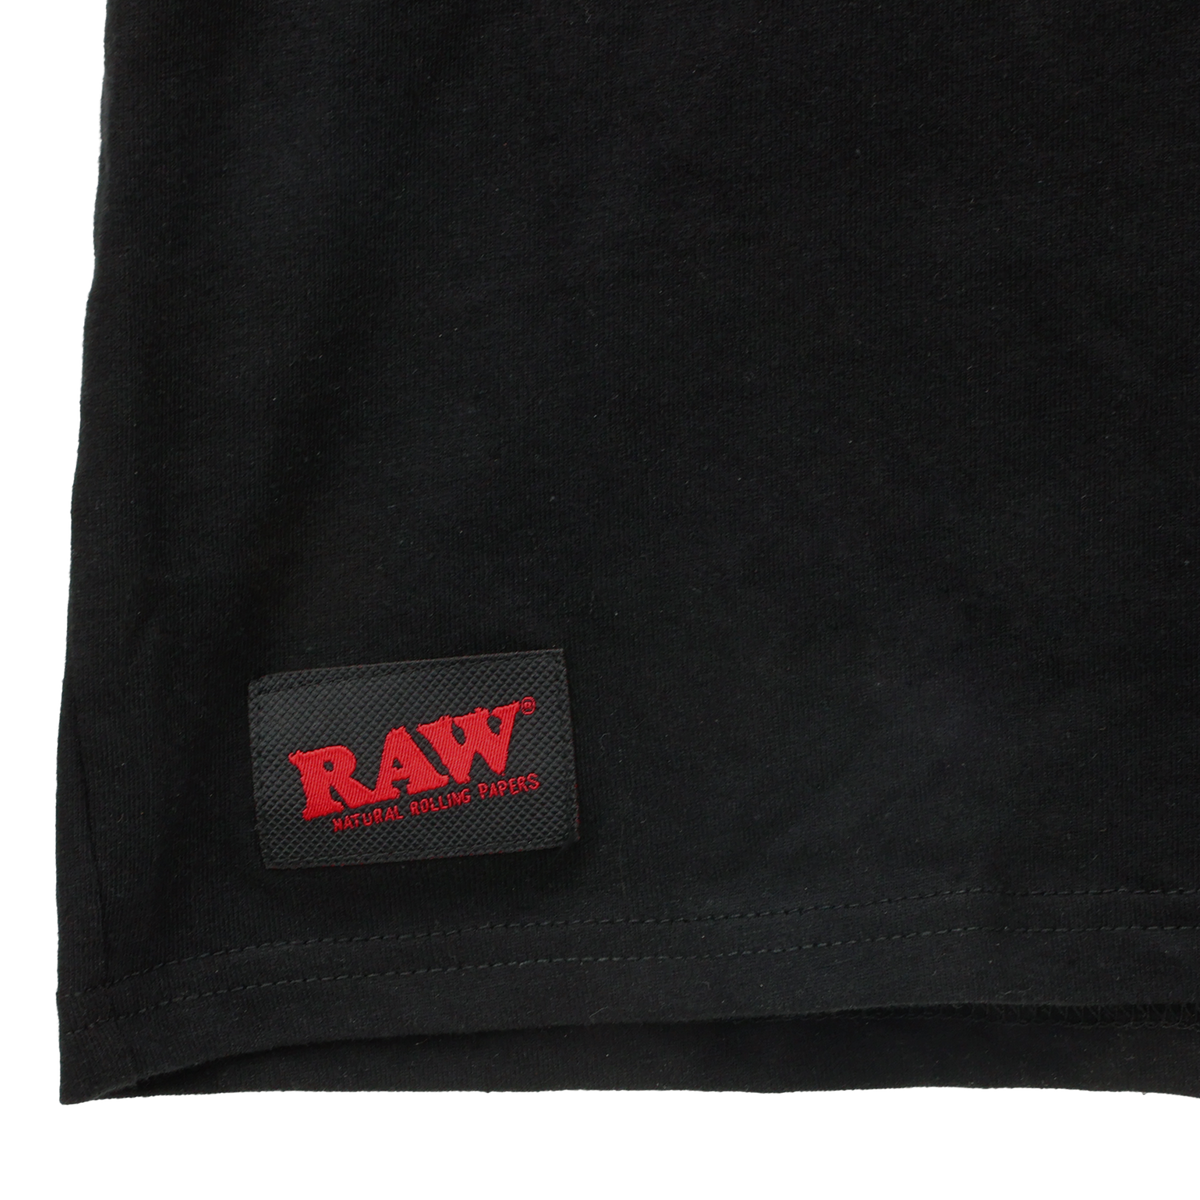 RAW Long Sleeve Crew Neck Shirt Clothing Accessories esd-official